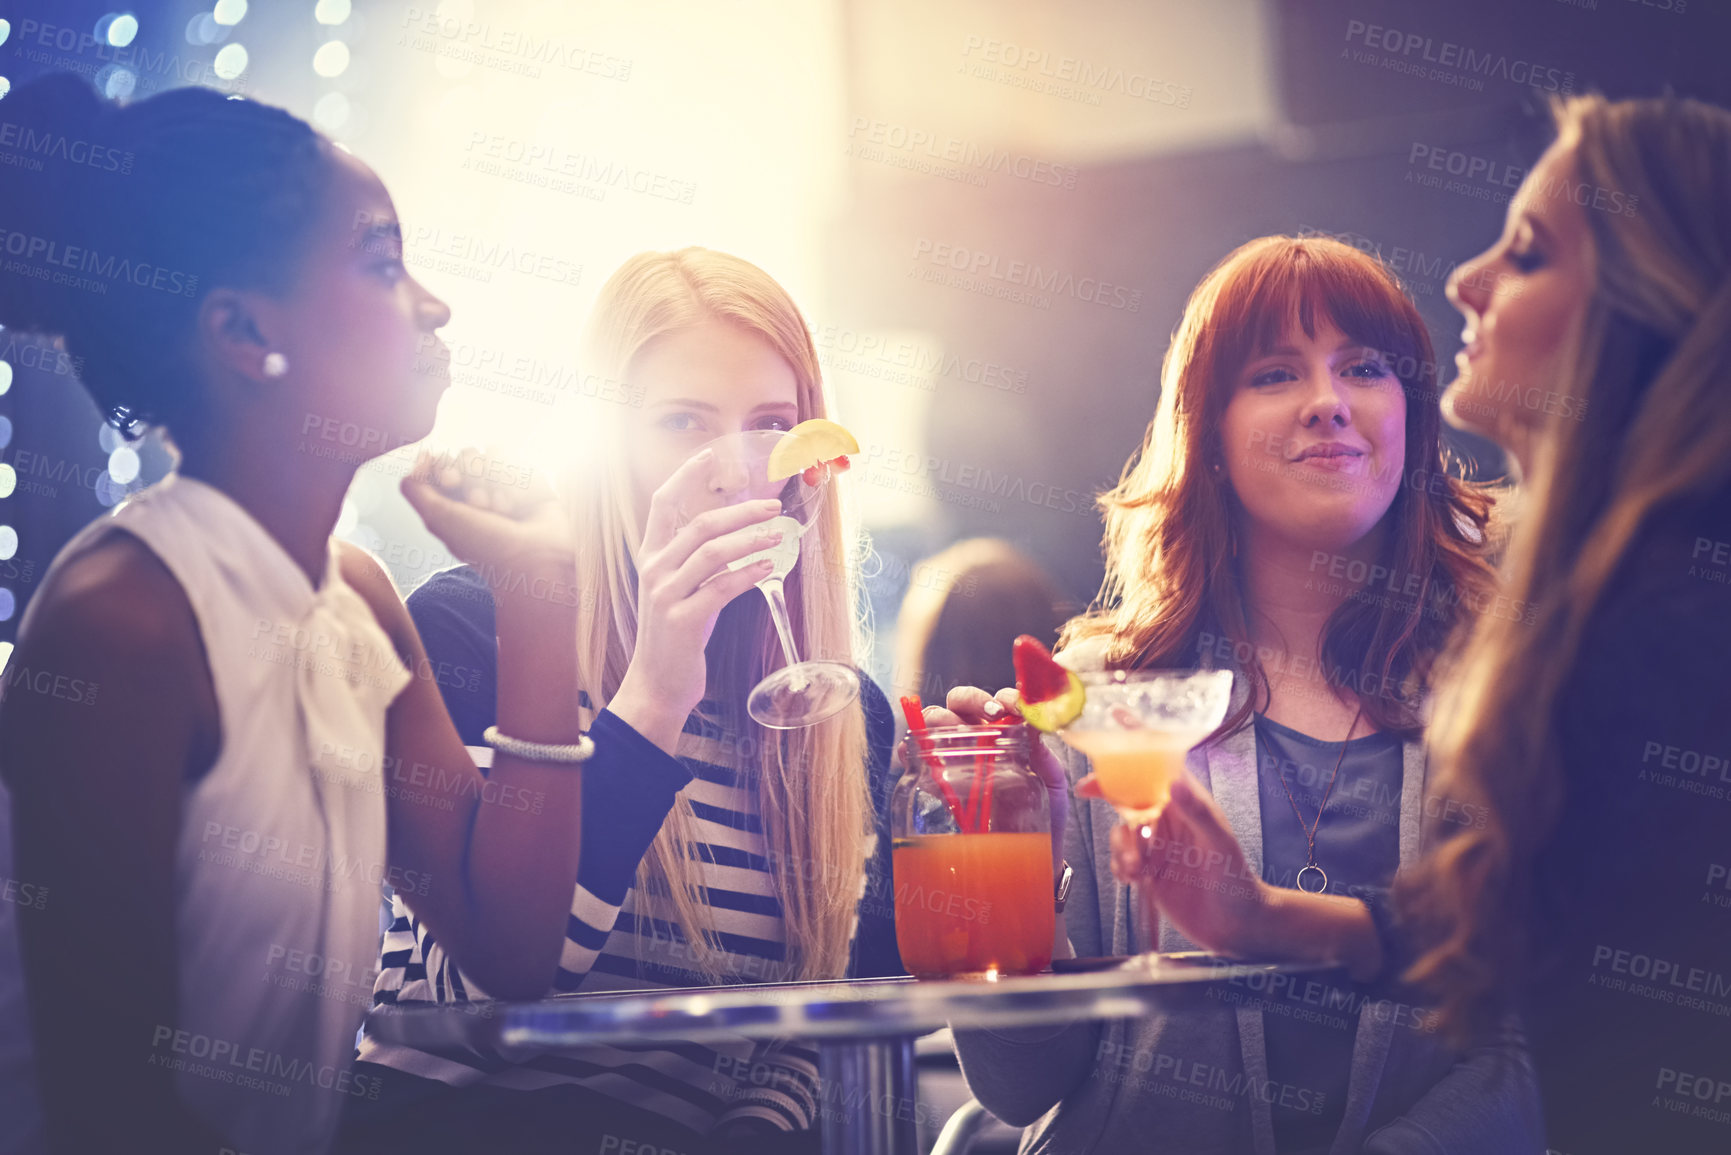 Buy stock photo Shot of a group of friends relaxing with cocktails in a nightclub